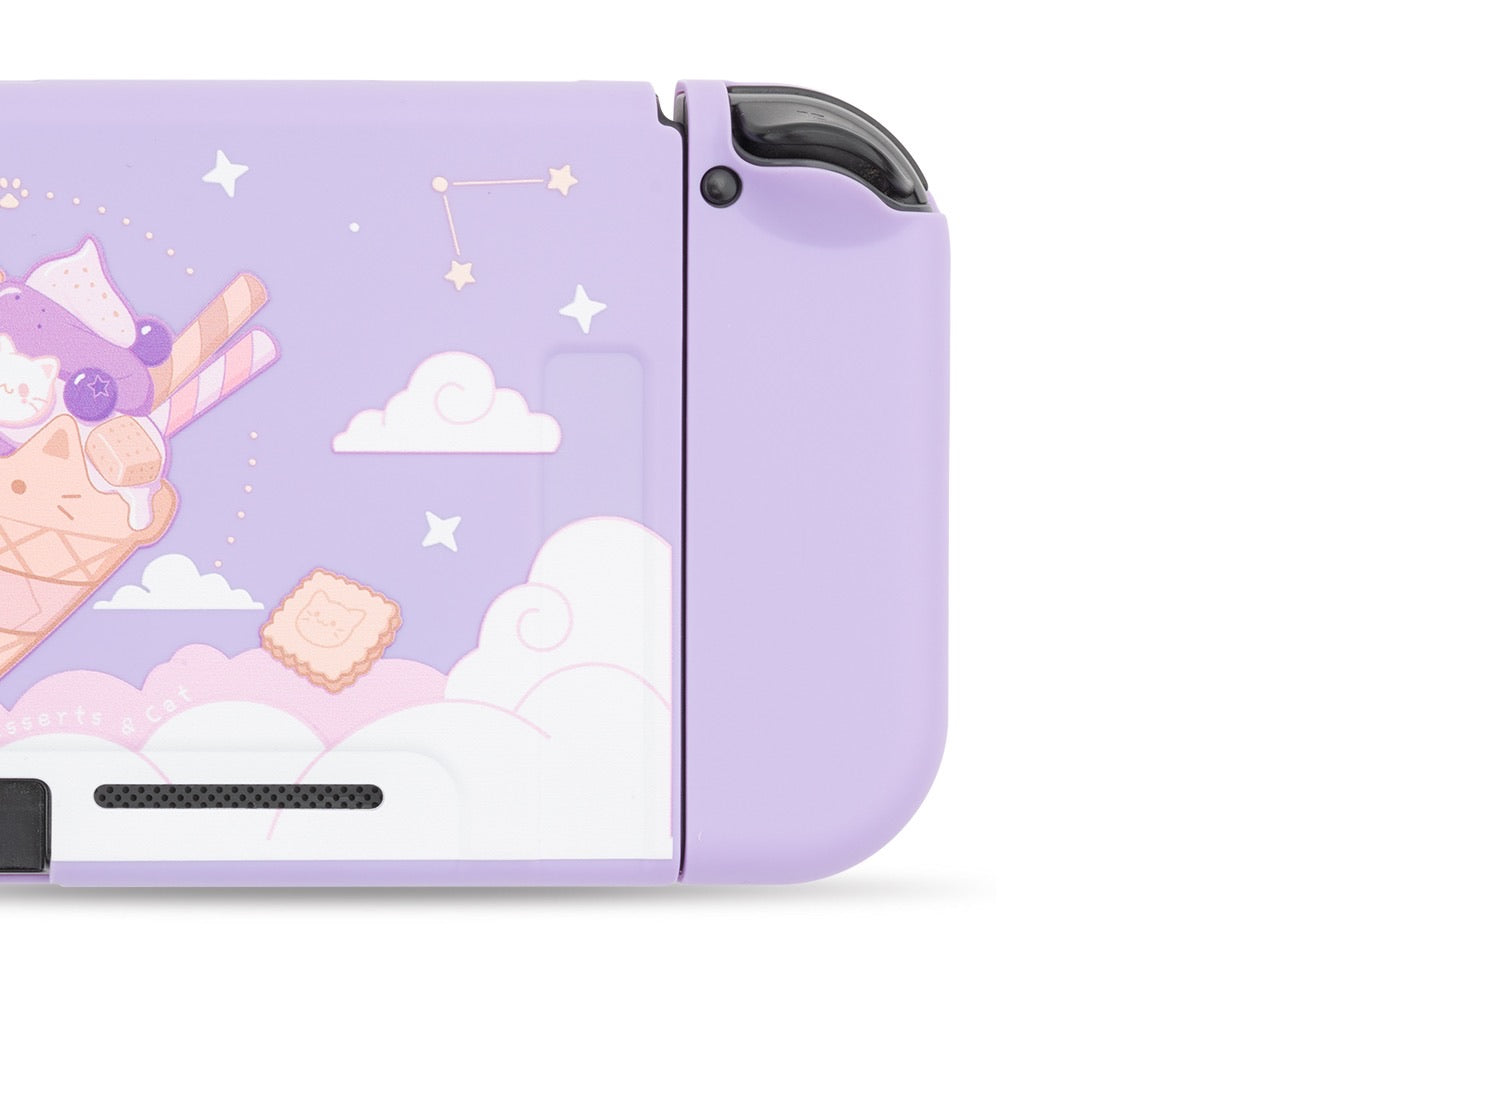 Purple Ice Cream Cat Pastel colors__Nintendo Switch Protection Casing Cover